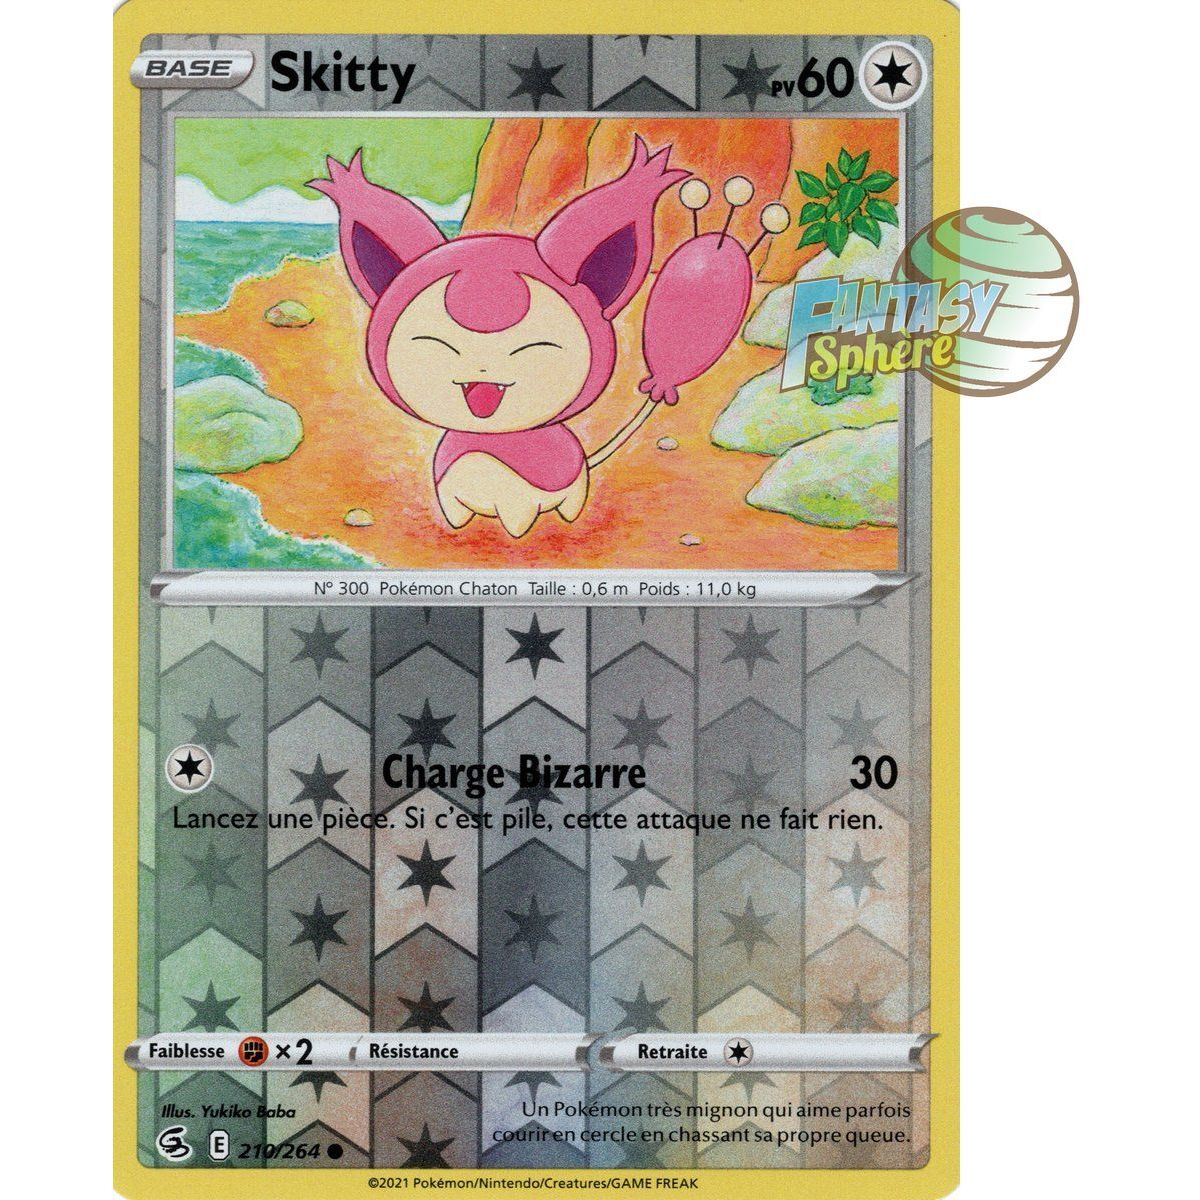 Skitty - Reverse 210/264 - Sword and Shield 8 Fusion Fist